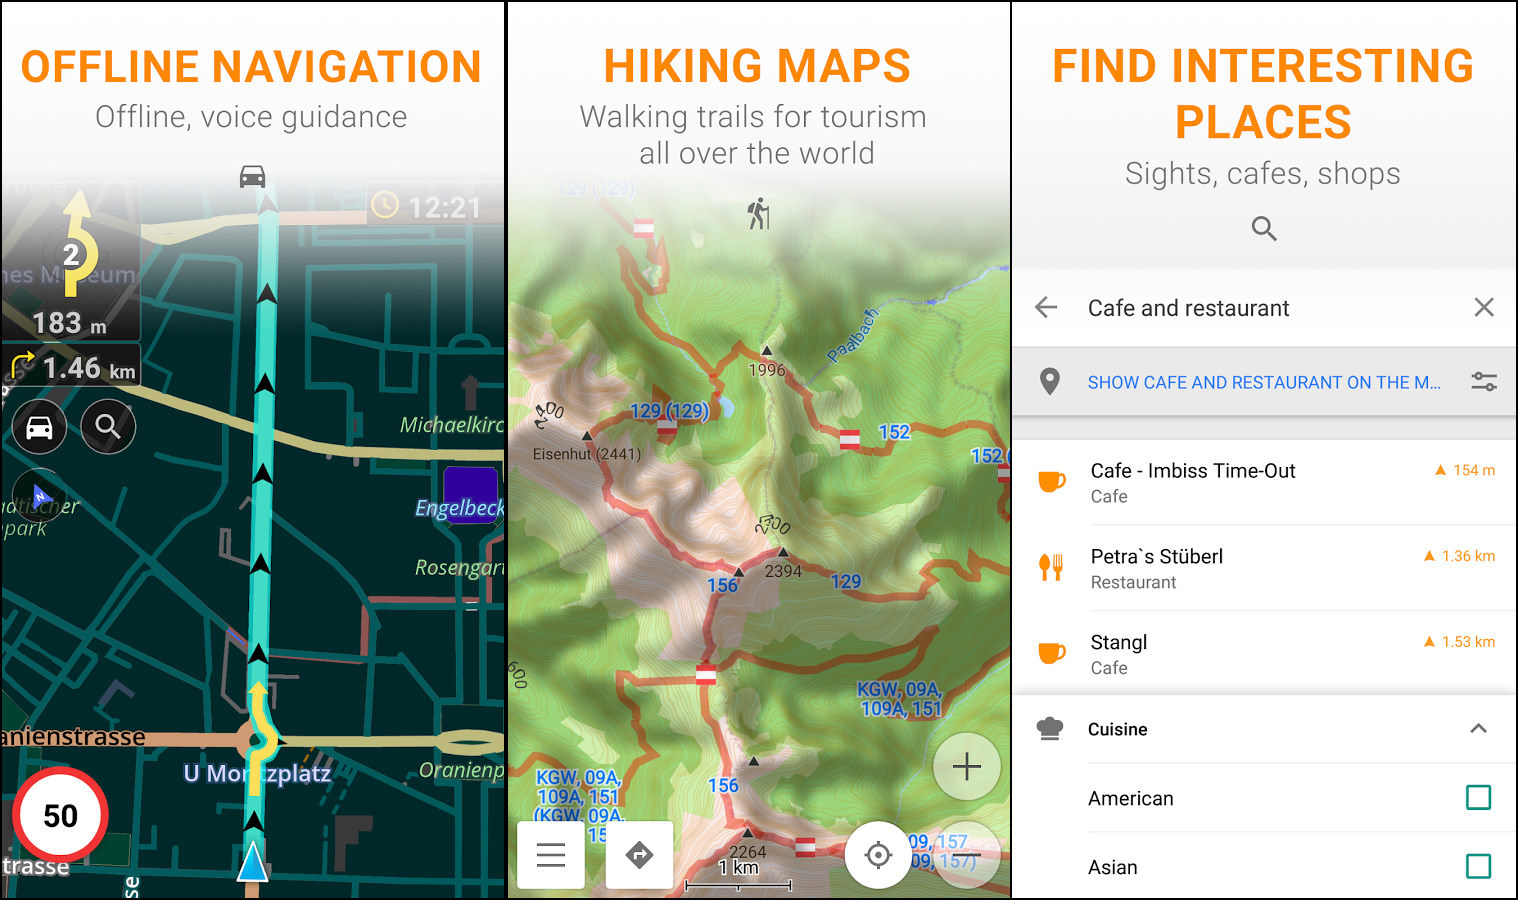 Top 10 Map Apps 